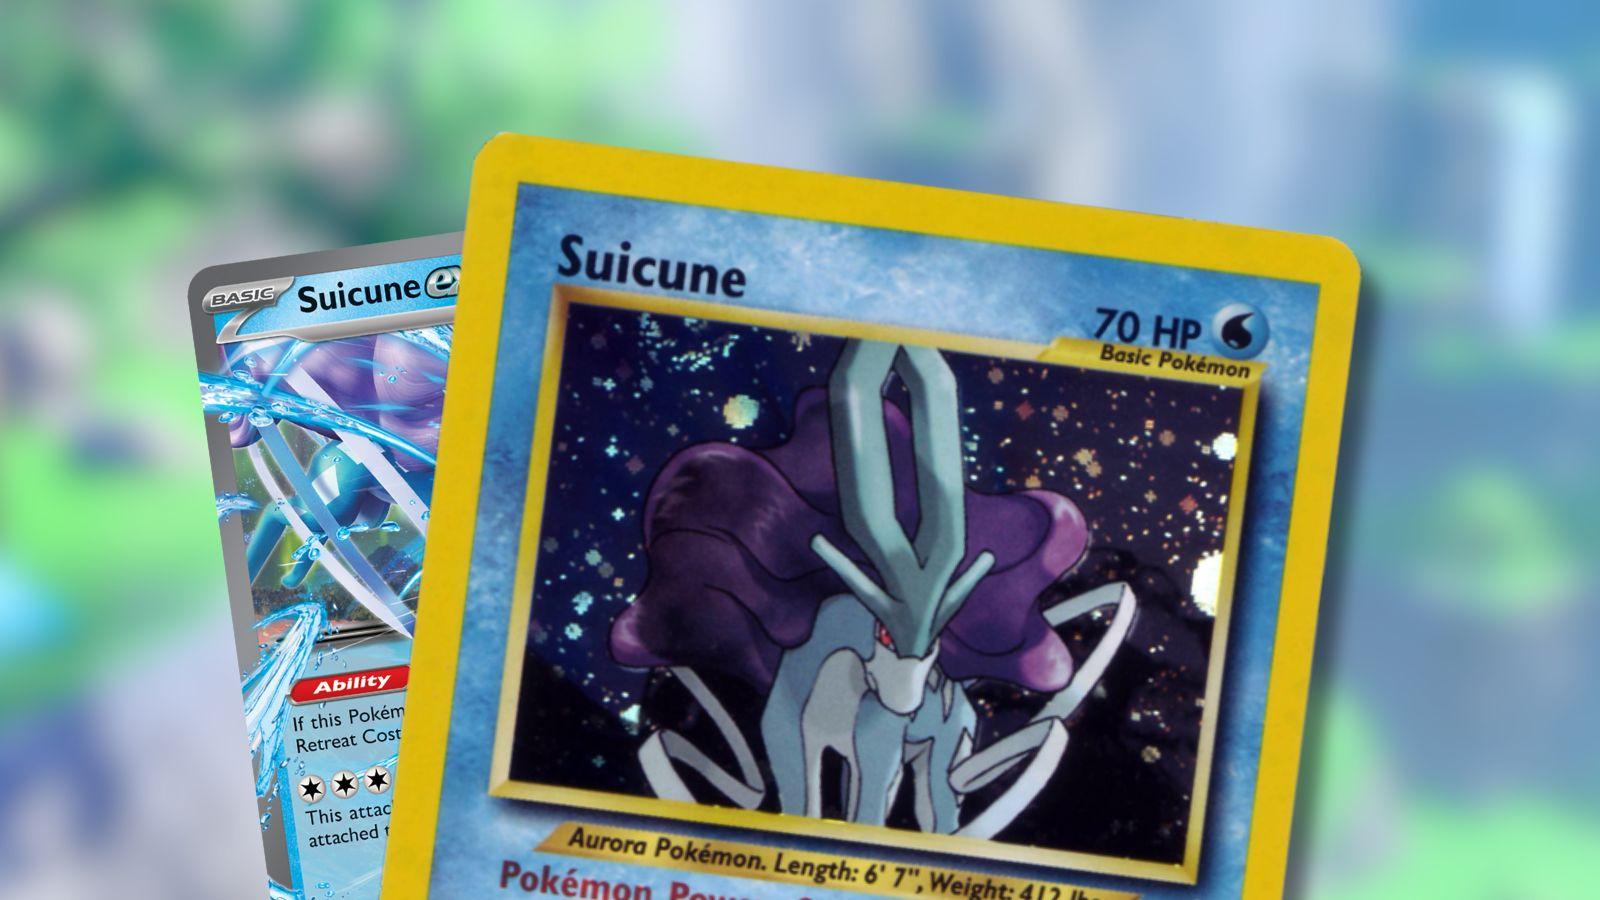 Suicune Pokemon cards with video game background.